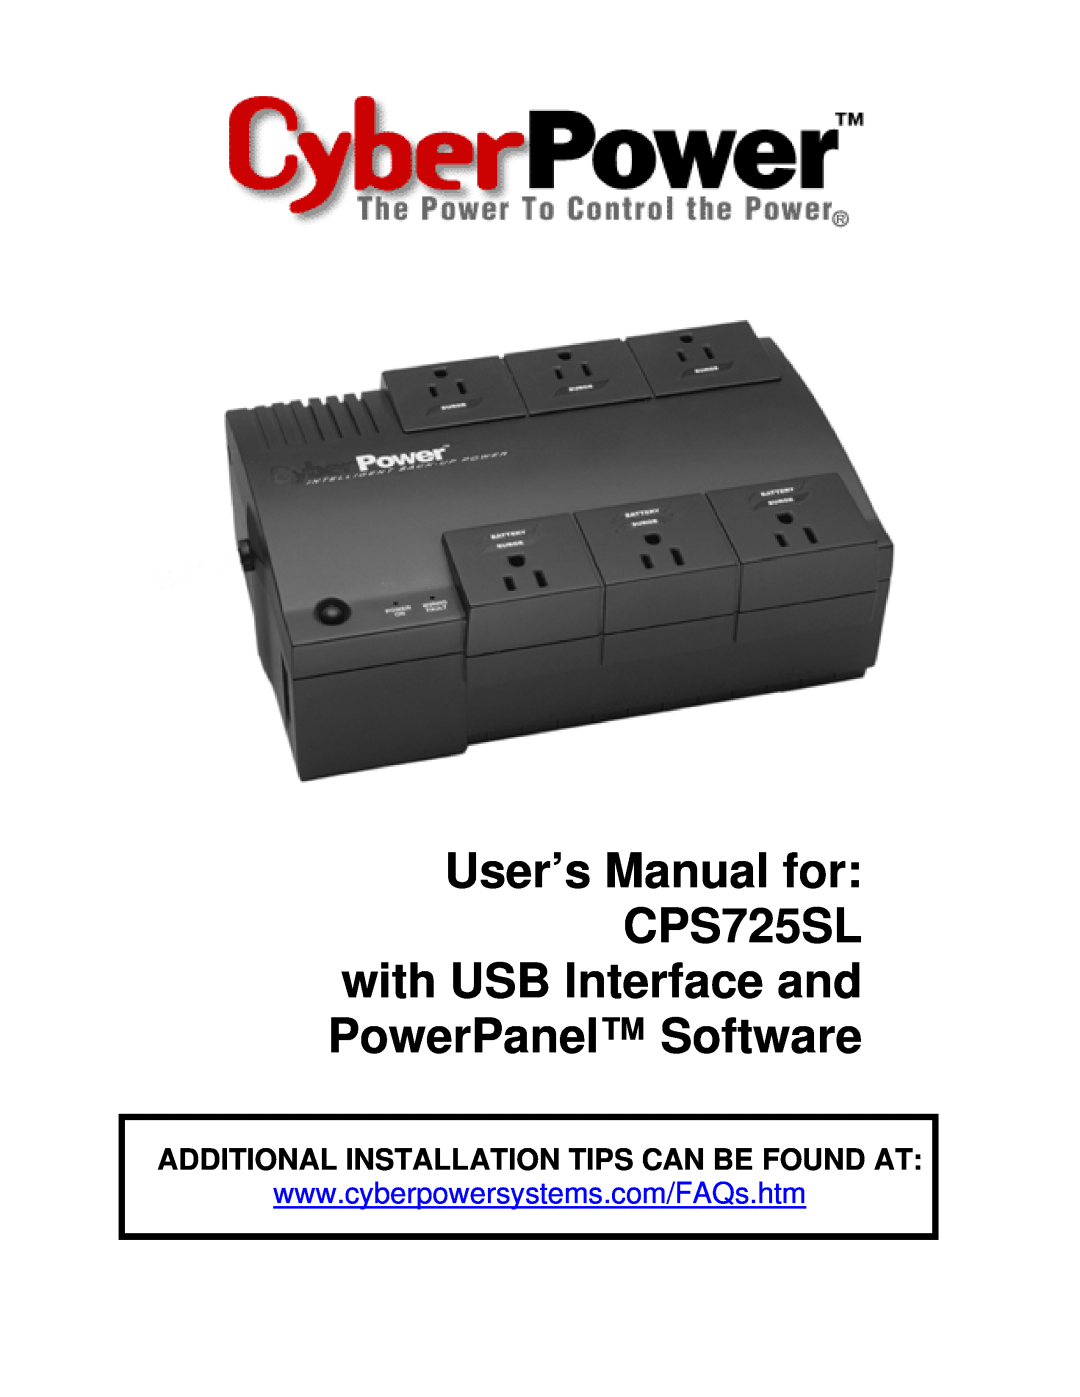 CyberPower Systems user manual User’s Manual for CPS725SL with USB Interface and PowerPanel Software 